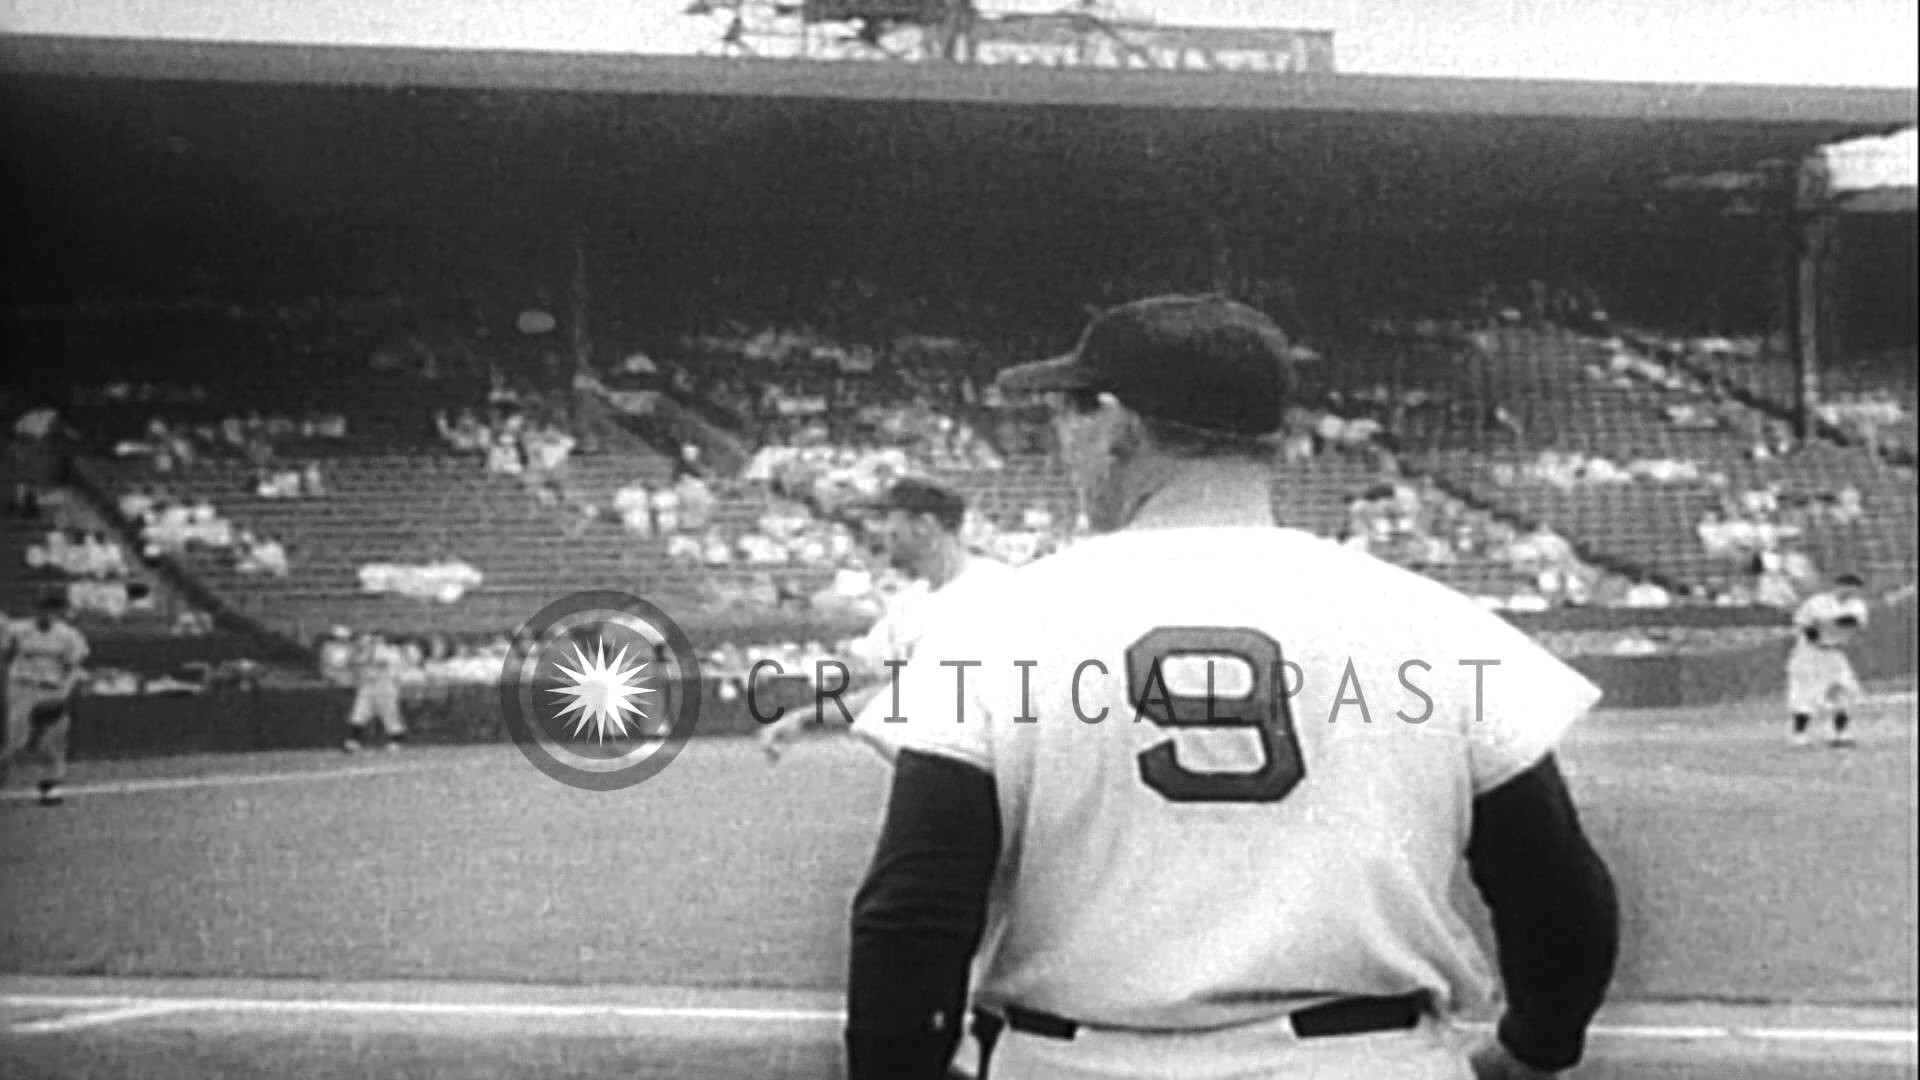 Mickey Mantle and Ted Williams compete for 1957 batting chanpionship, and MilwaukHD Stock Footage